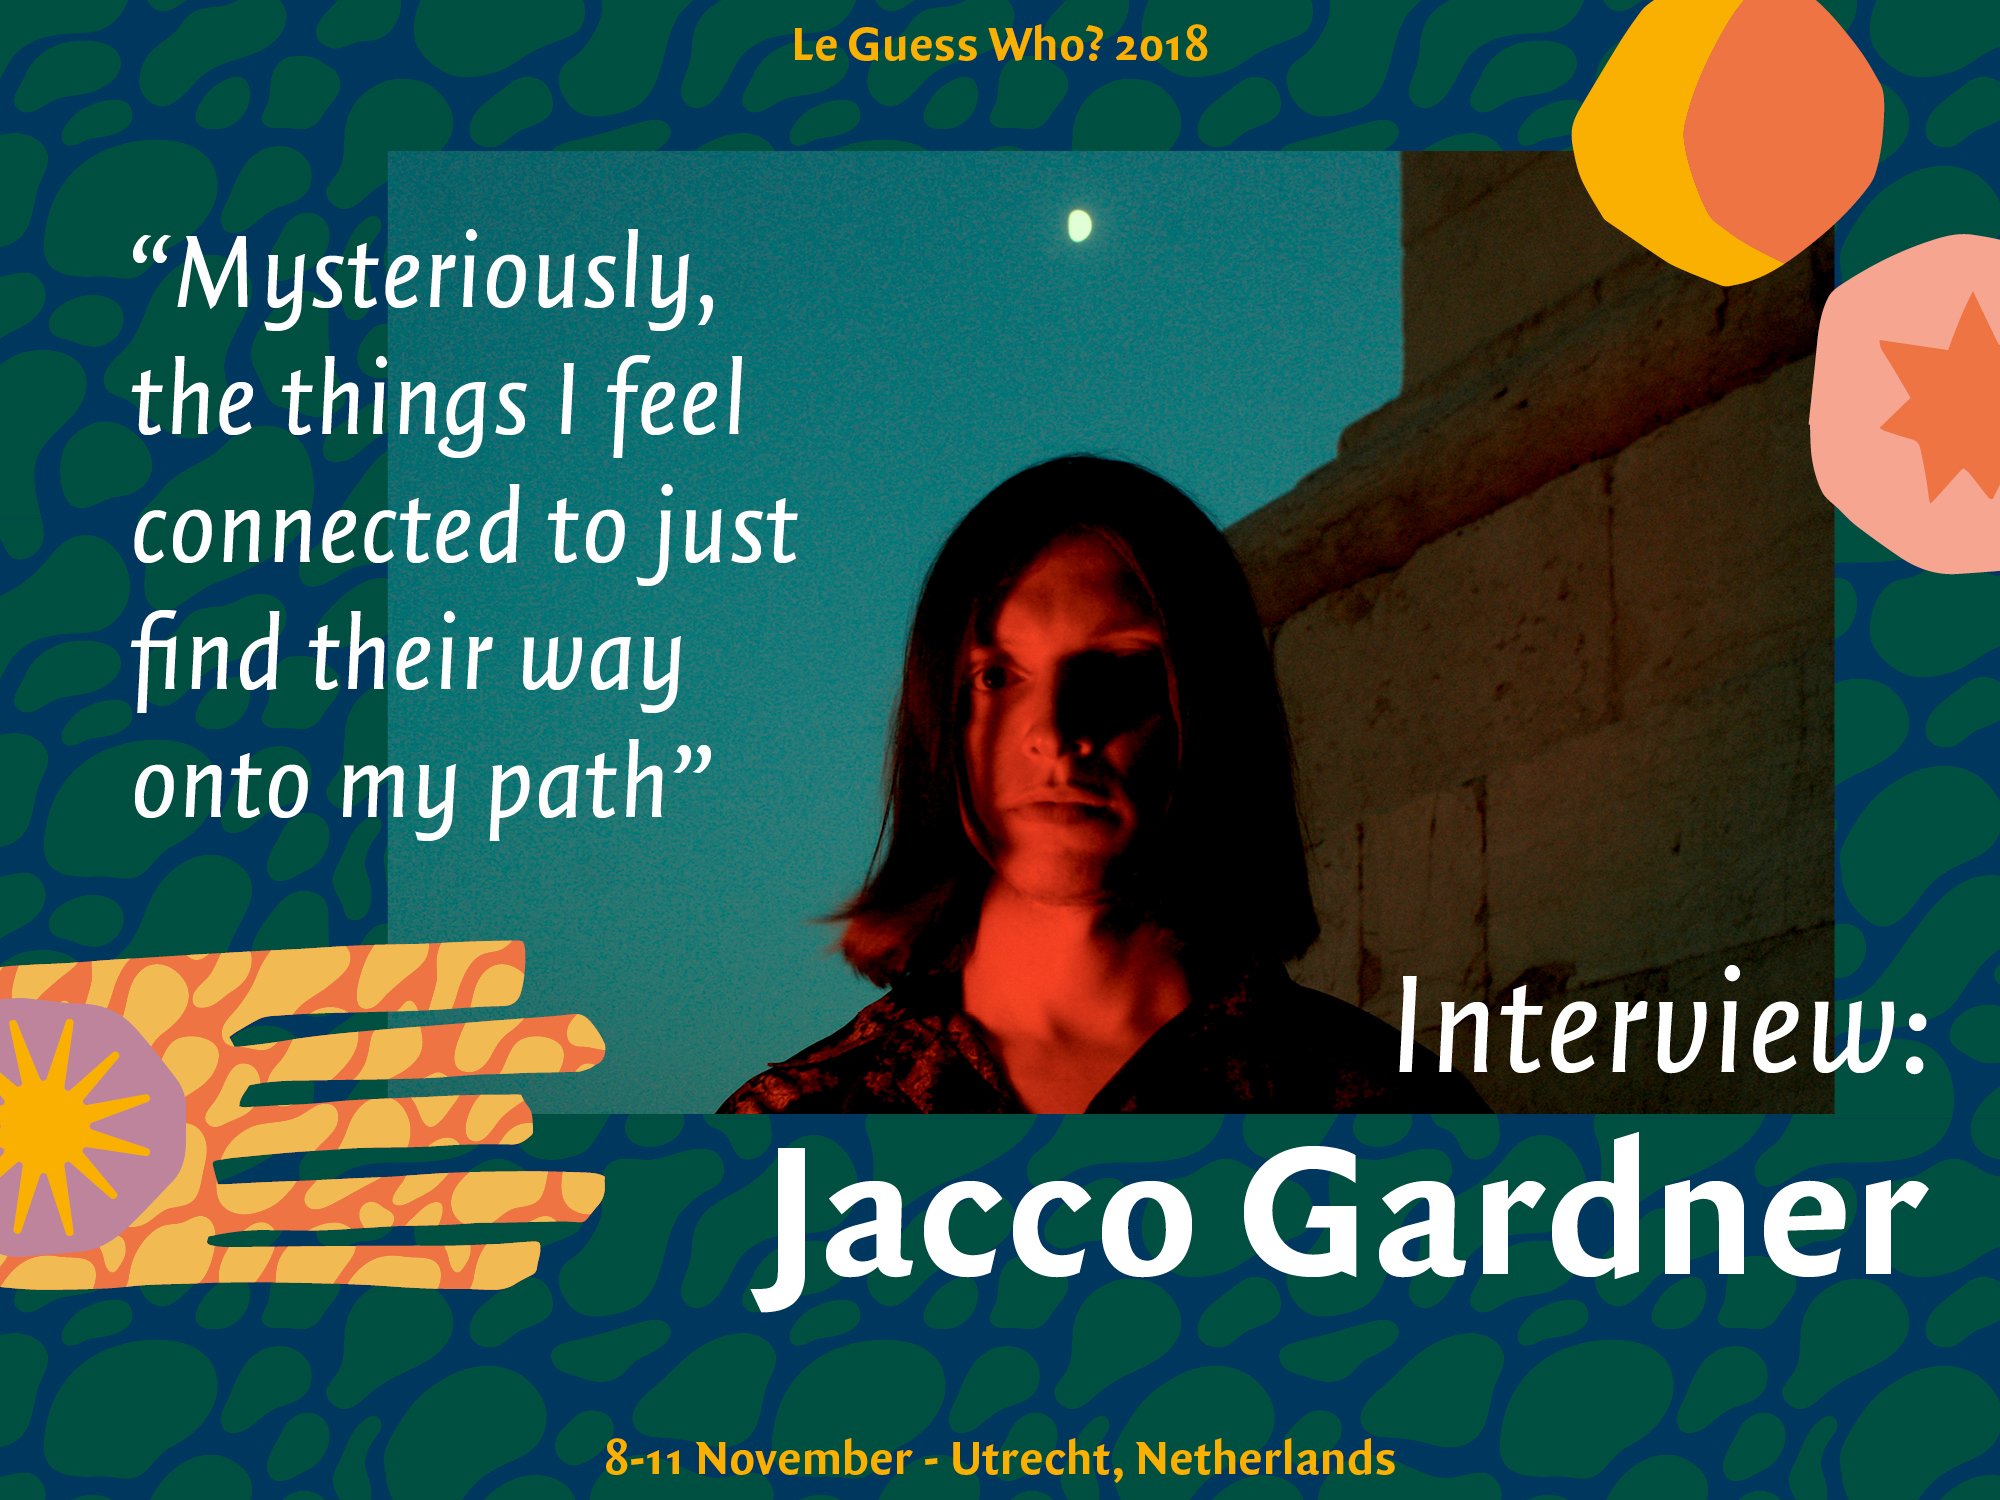 Jacco Gardner: "Mysteriously, the things I feel connected to just find their way onto my path"